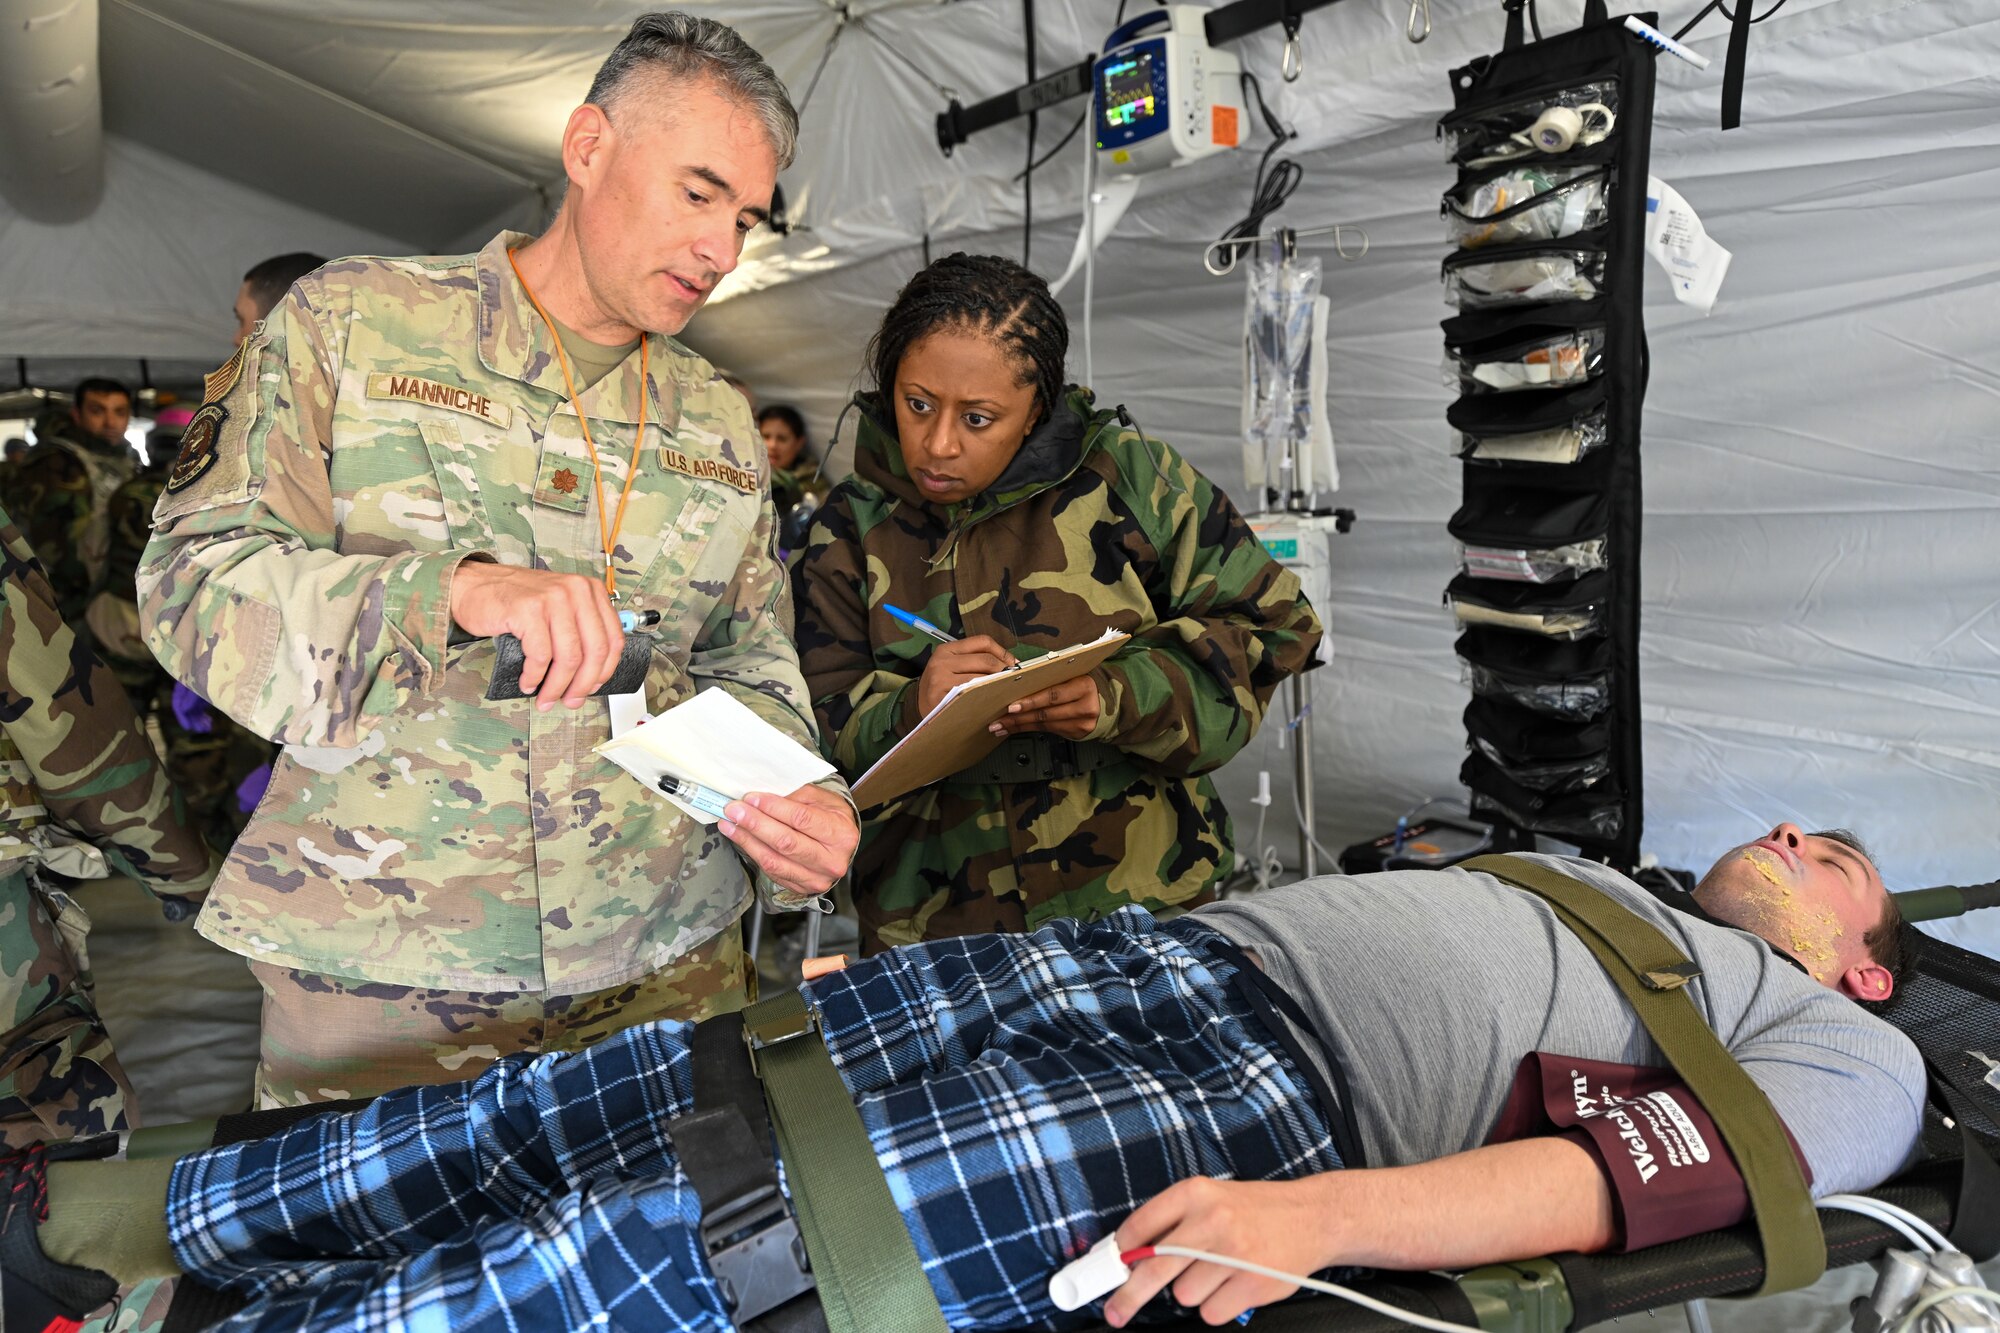 Maj. Robert Manniche, a member of the 349th Medical Squadron, Travis Air Force Base, California, provides patient information to a Reserve Citizen Airman medic during a simulated chemical attack as part of Exercise Patriot Medic at Youngstown Air Reserve Station, Ohio, Aug. 16, 2023.